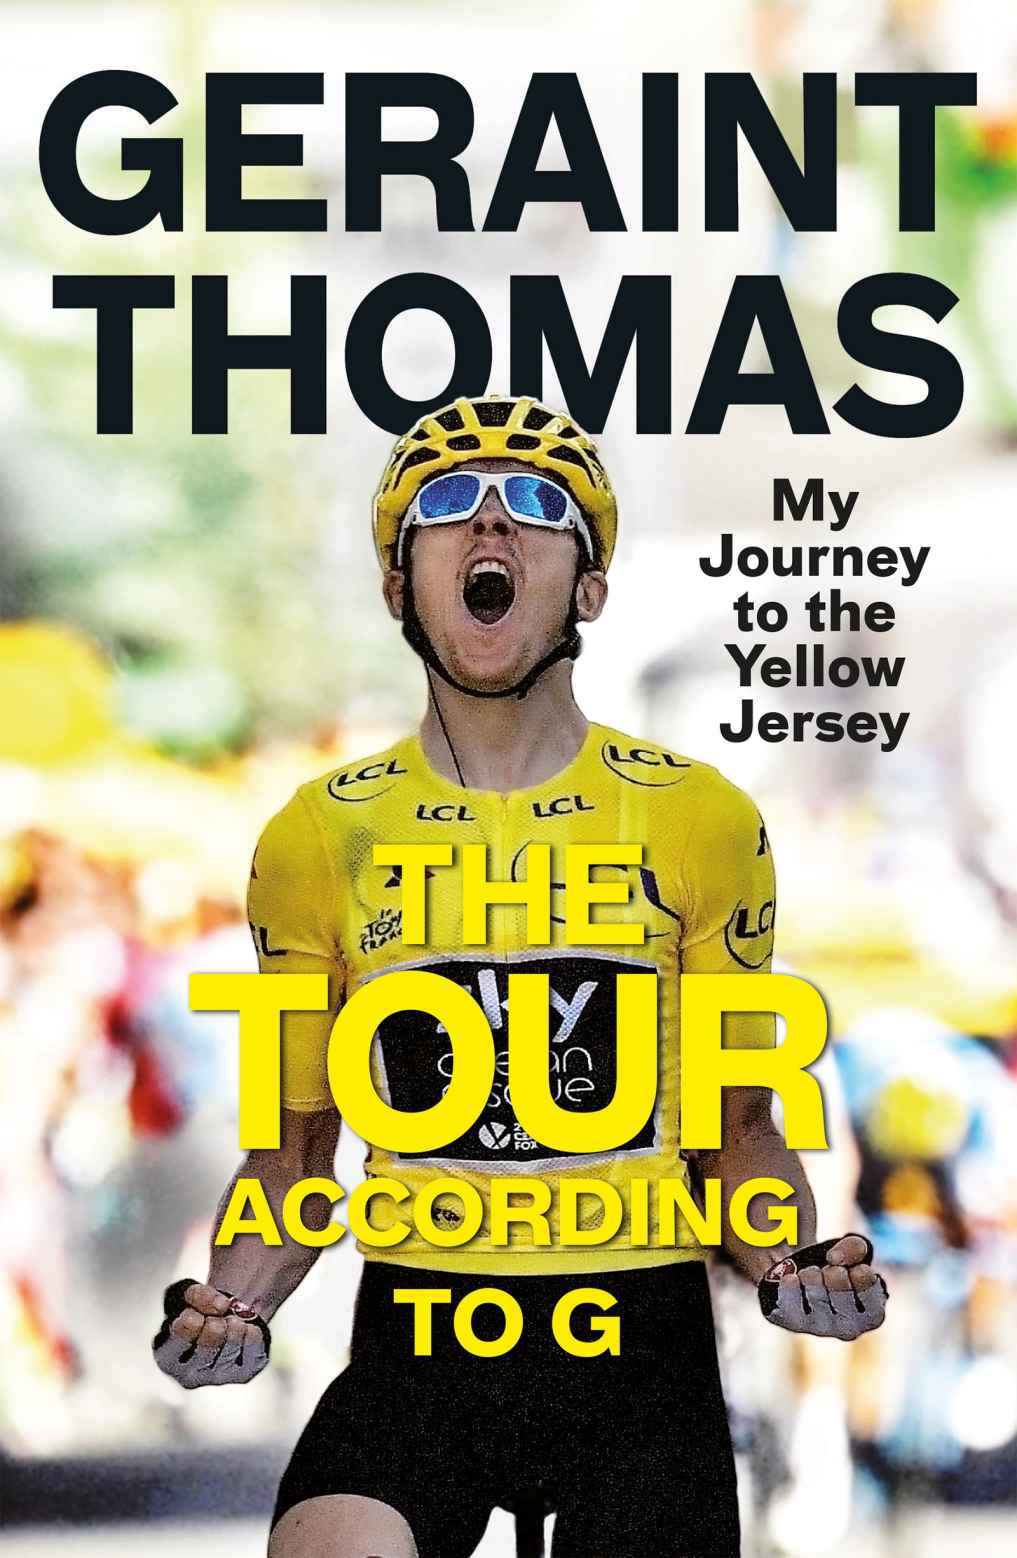 The Tour According to G: My Journey to the Yellow Jersey by Geraint Thomas